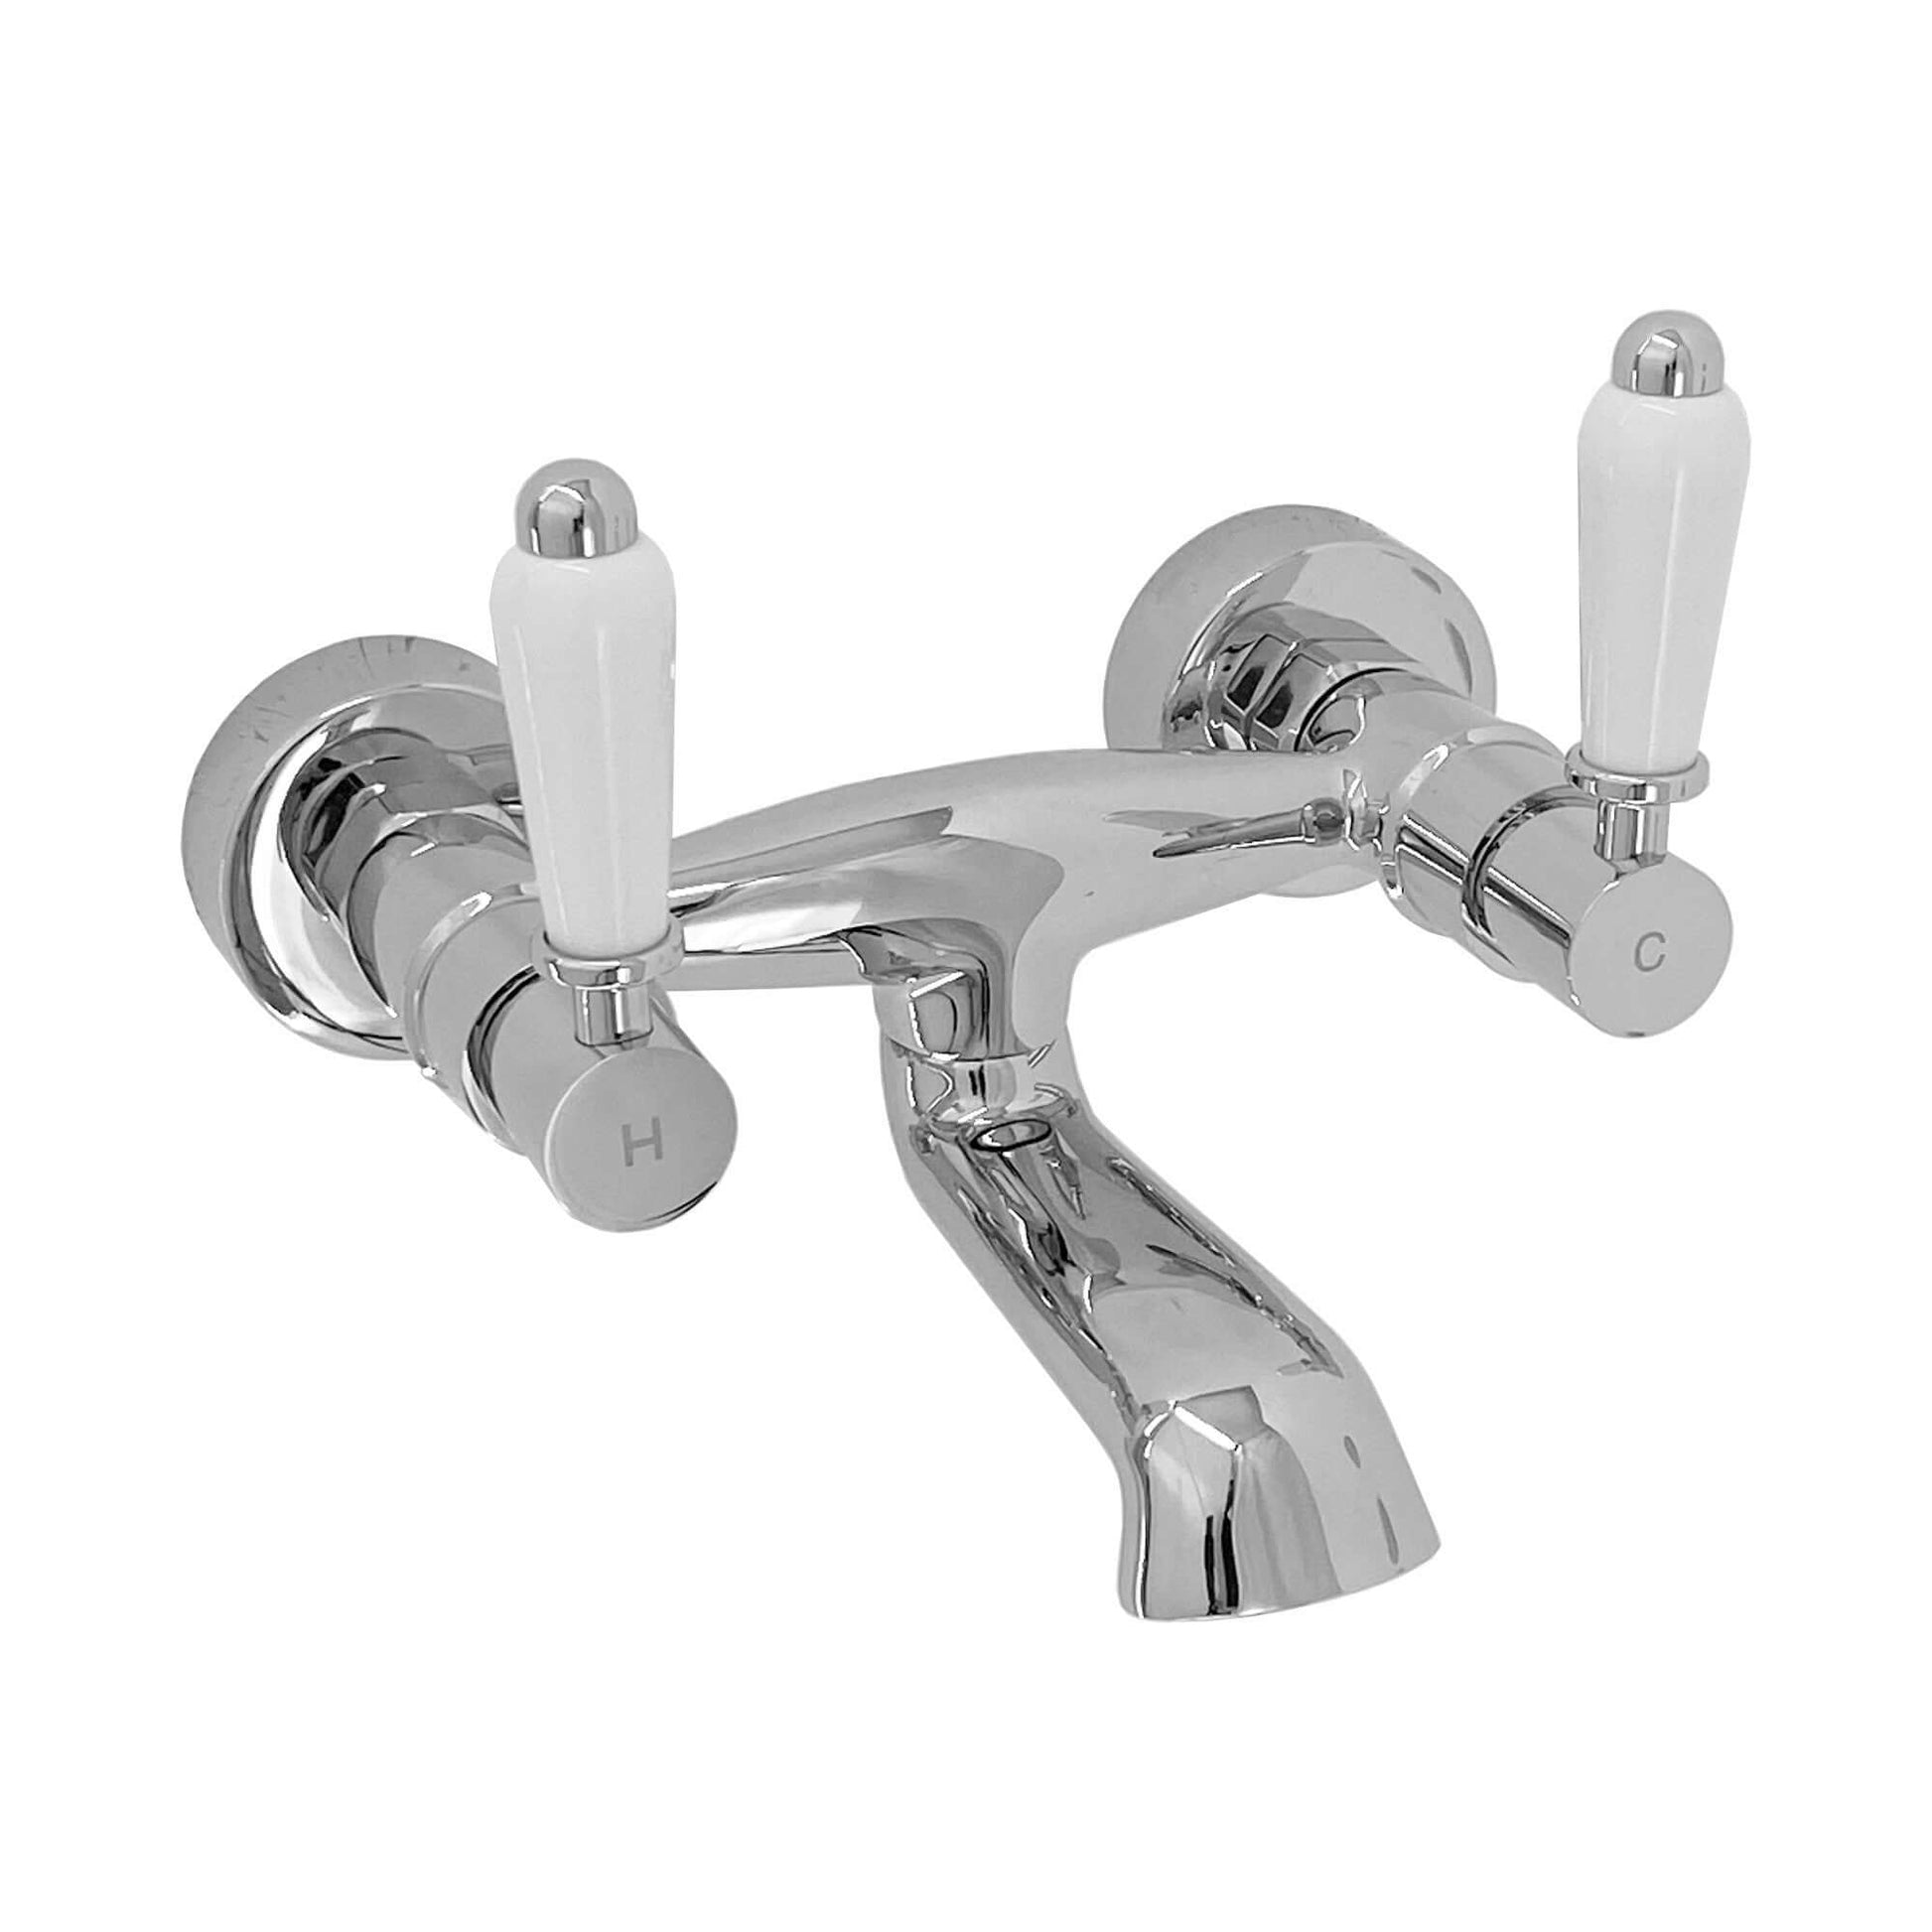 Downton wall mounted bath mixer tap with white ceramic levers - chrome - Taps